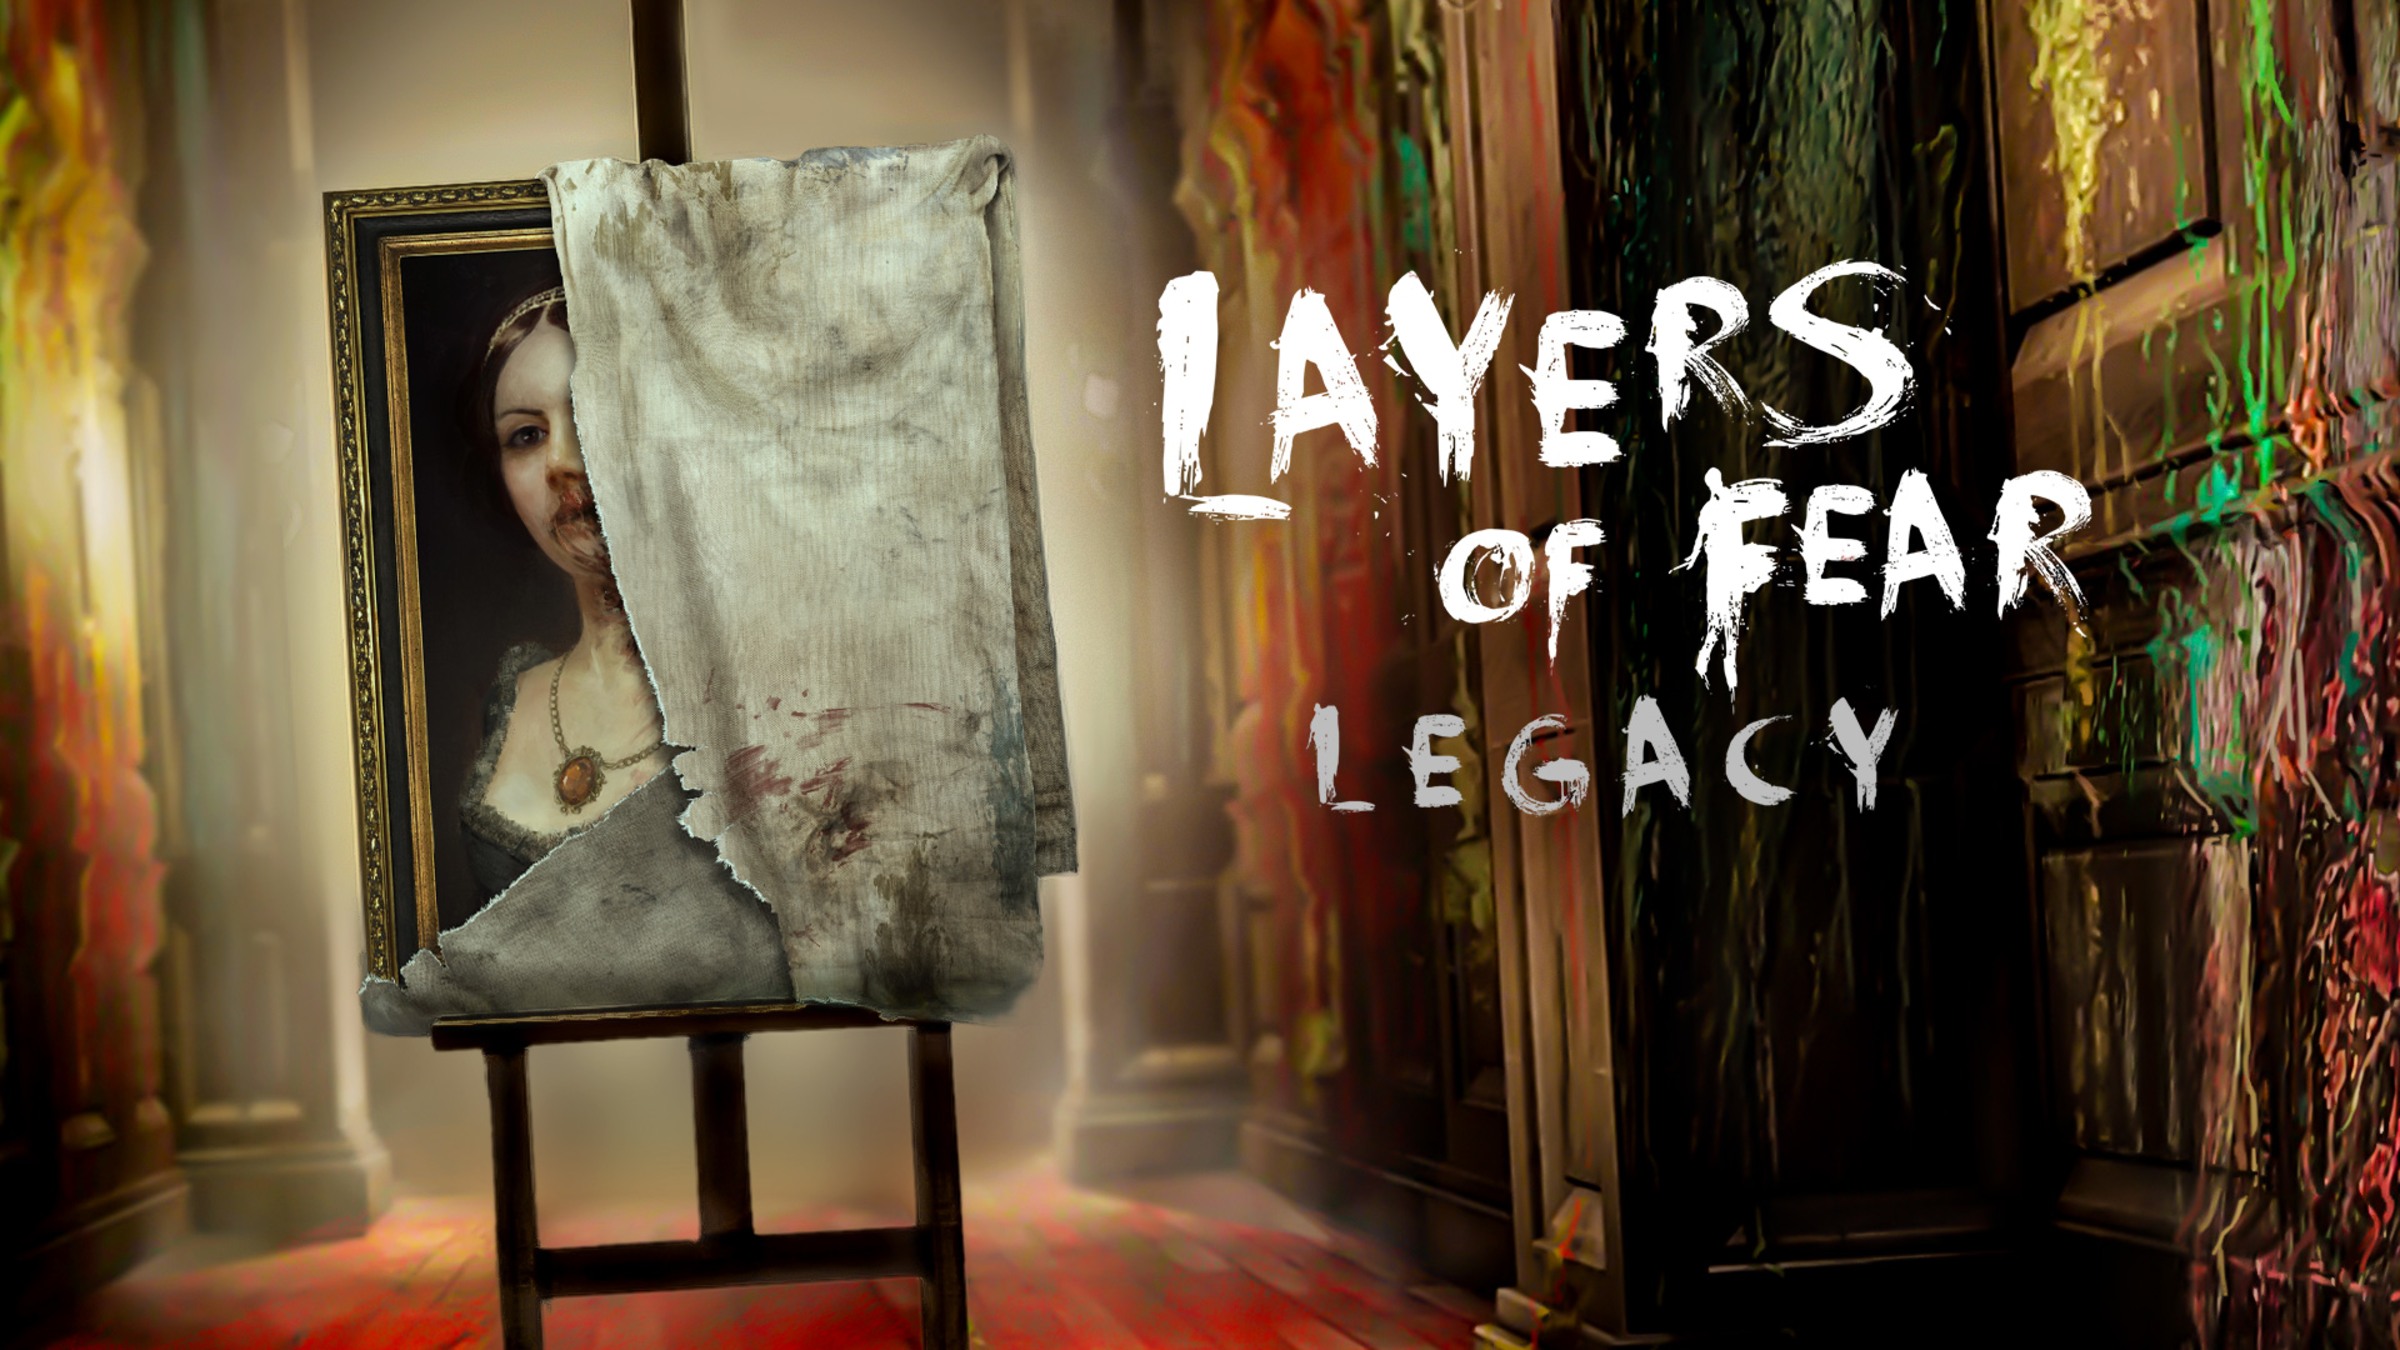 Layers of Fear: Inheritance [Online Game Code]